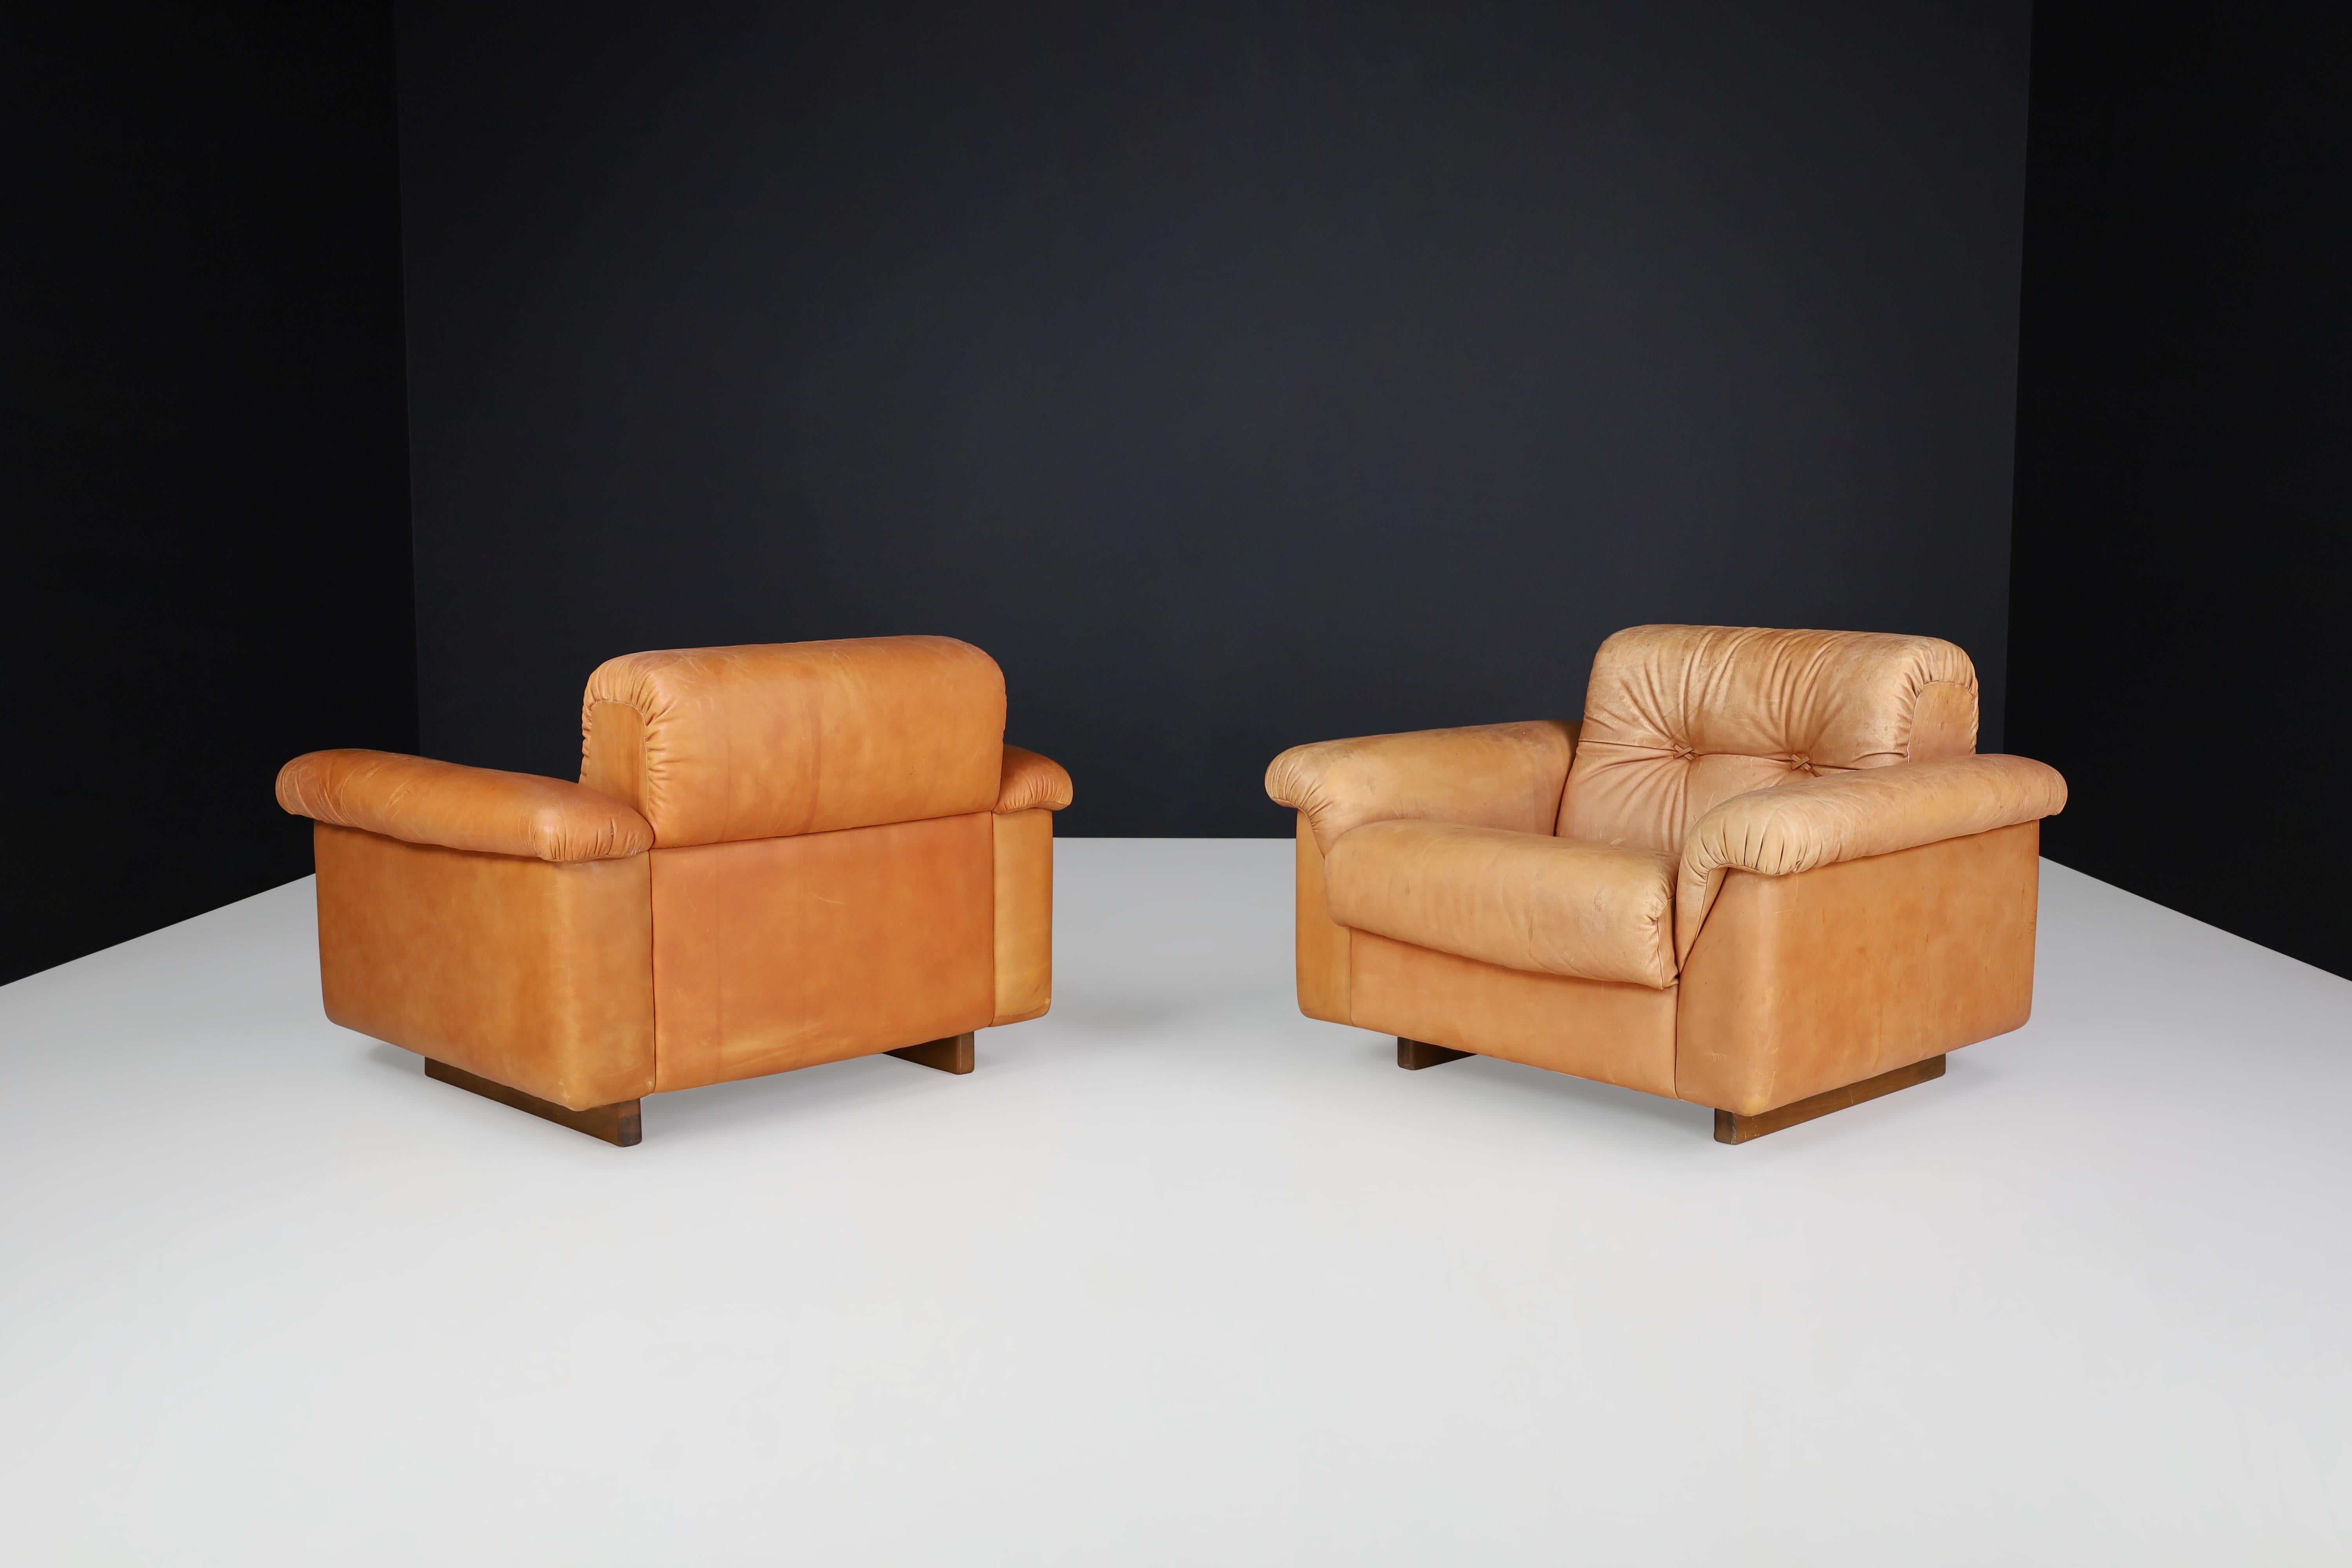 De Sede DS 45 Lounge Chairs in Patinated Leather, Switzerland, 1970s For Sale 3